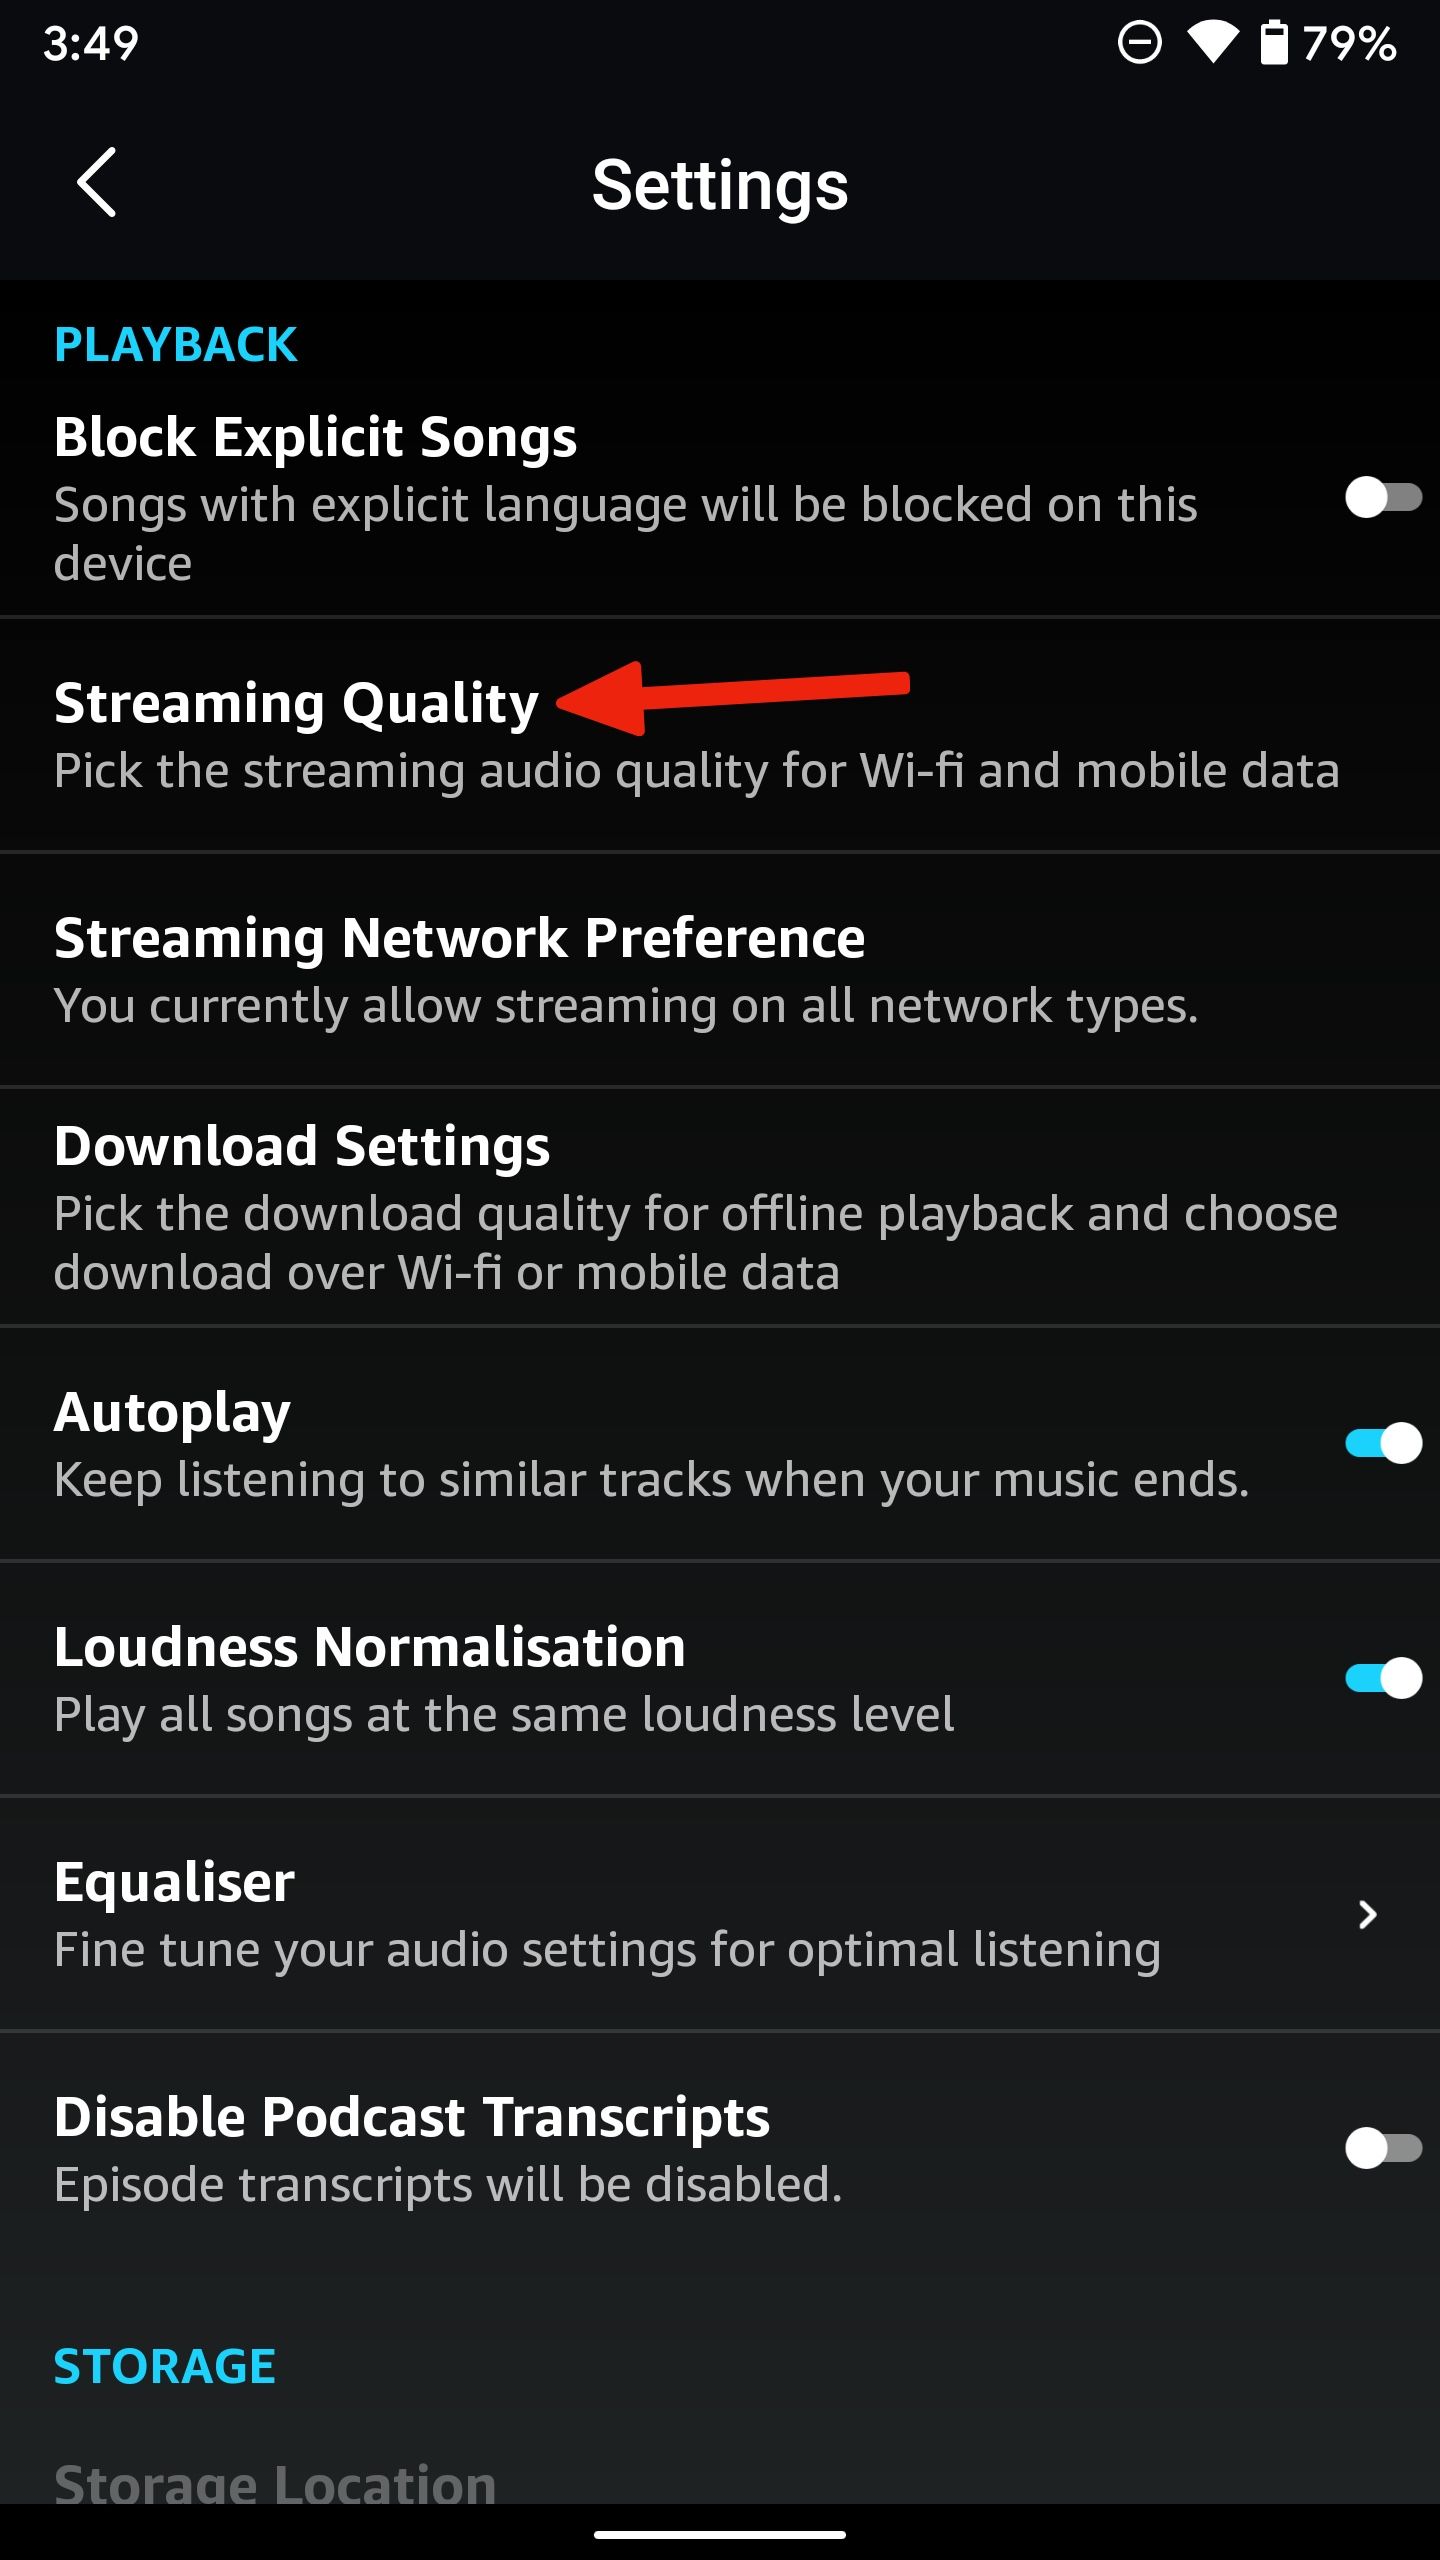 Settings page in the Amazon Music app with an arrow pointing to the option 